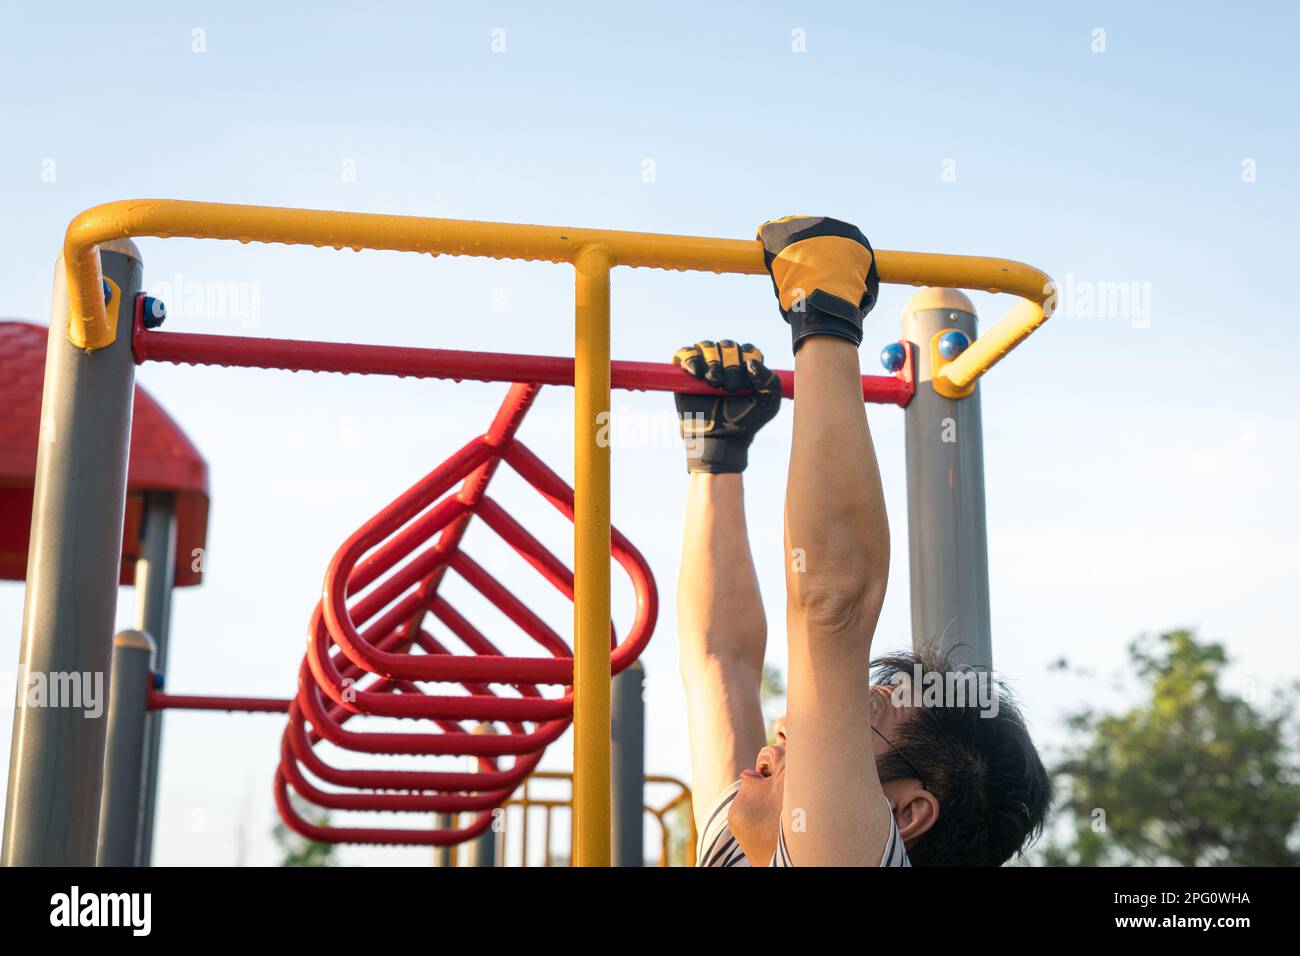 Man working out outdoors, arms swinging on monkey bar. Strength training or fitness exercise concept. Stock Photo